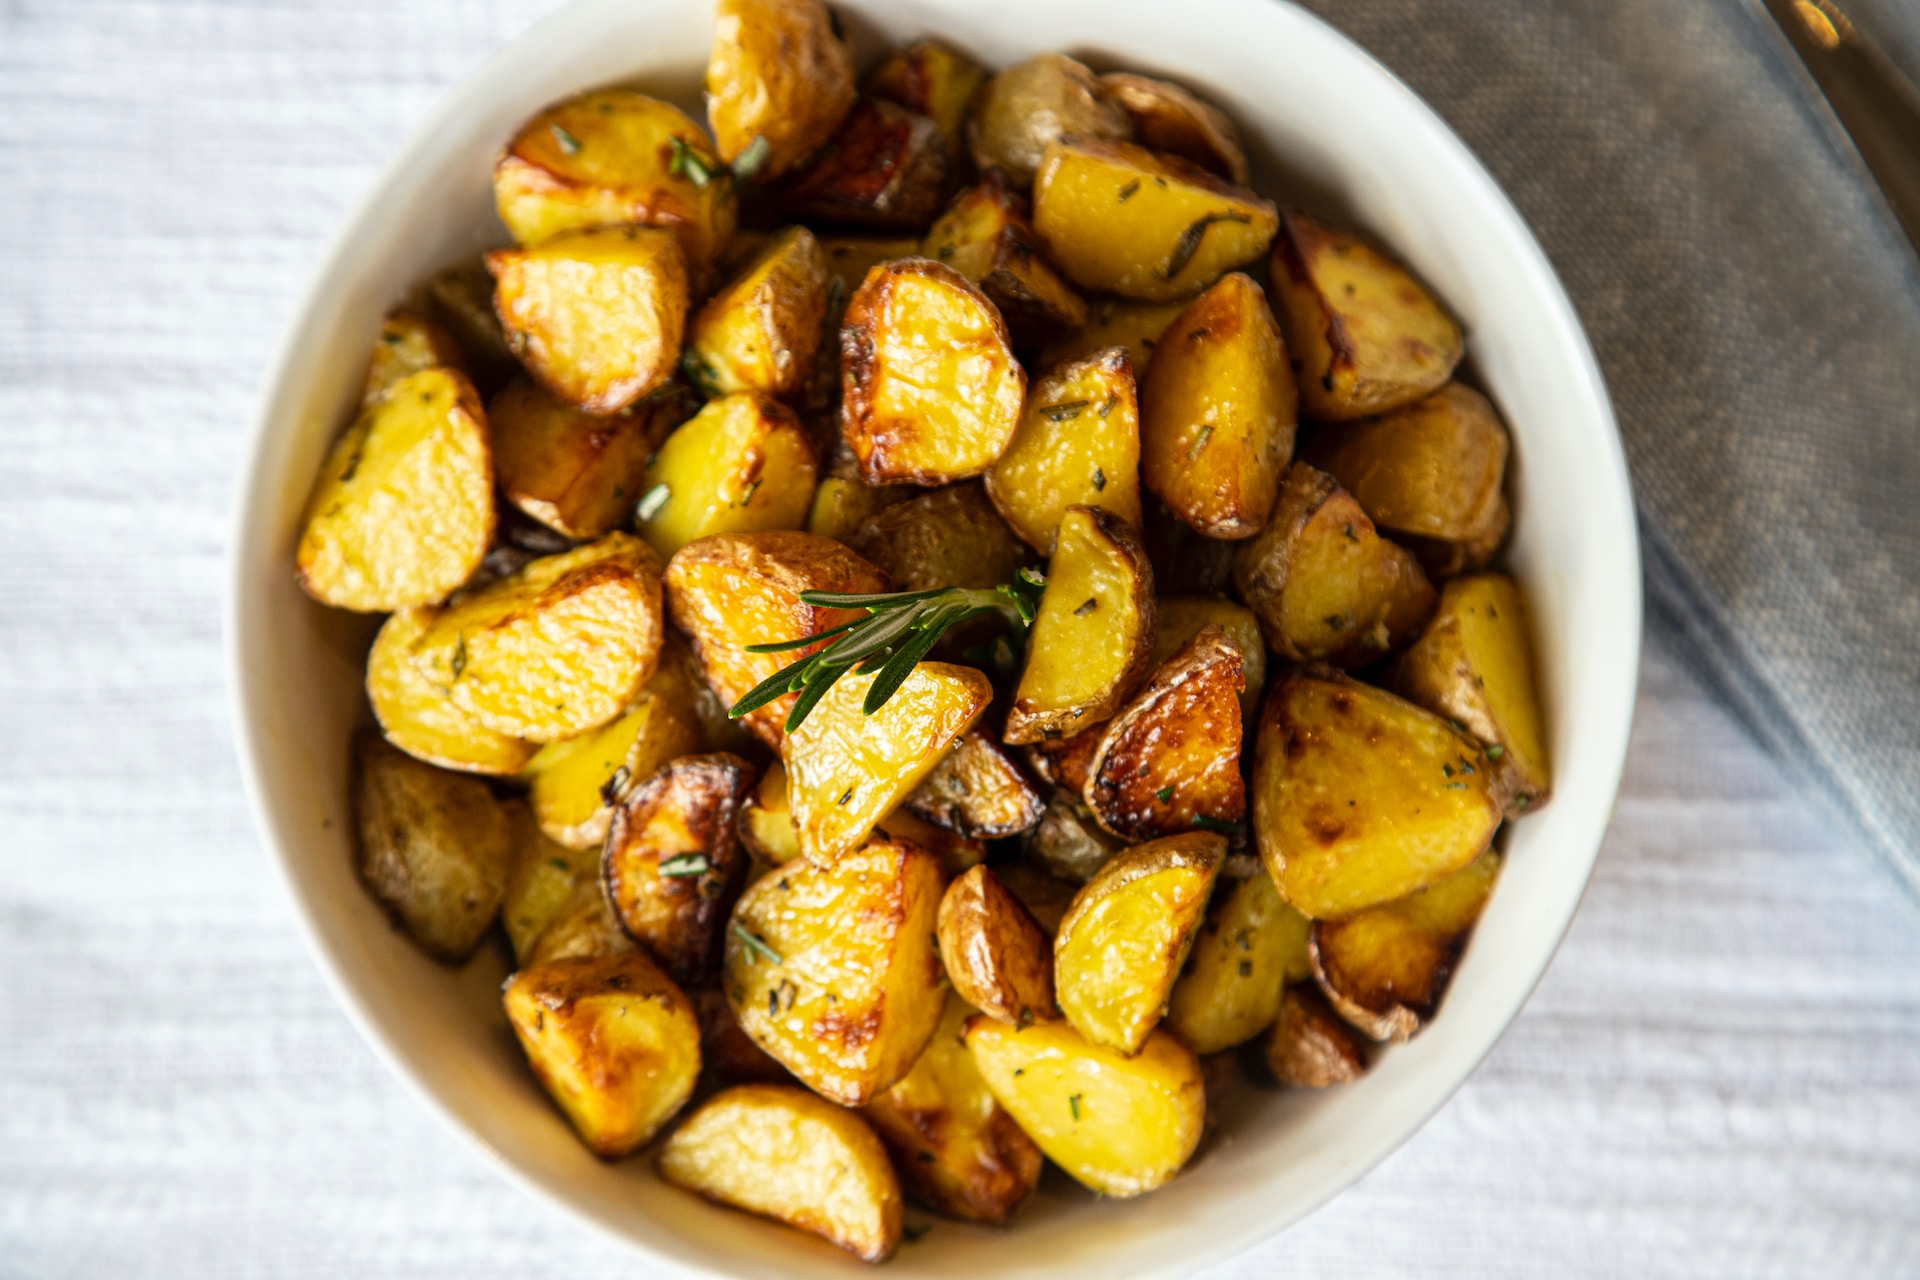 Potatoes require no peeling before cooking if you don't want to. The skin contains lots of fiber, minerals, vitamins, and antioxidant properties